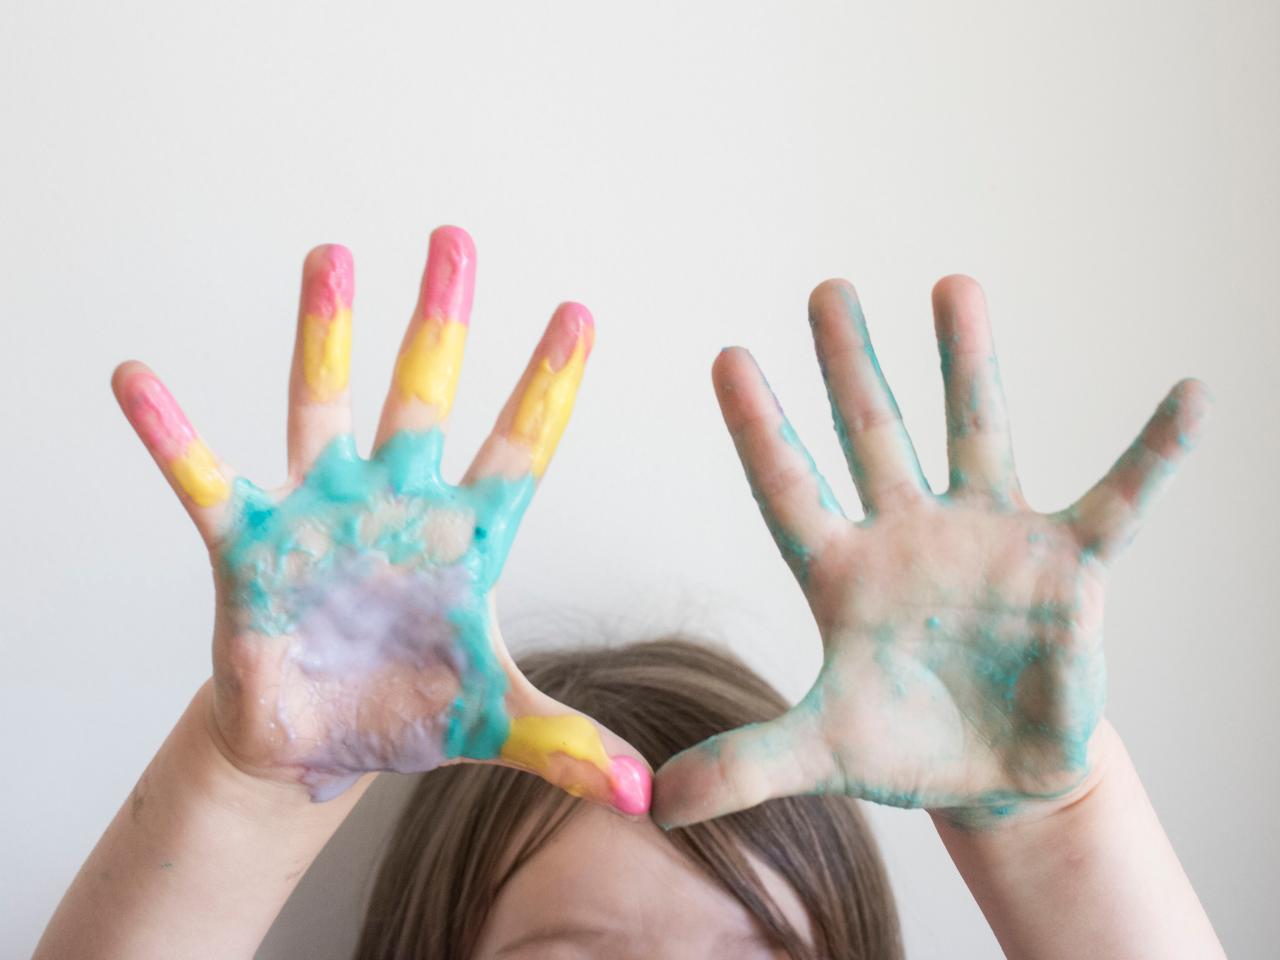 DIY) Non-Toxic Finger Paint Recipes So Easy a Kid Could Do It